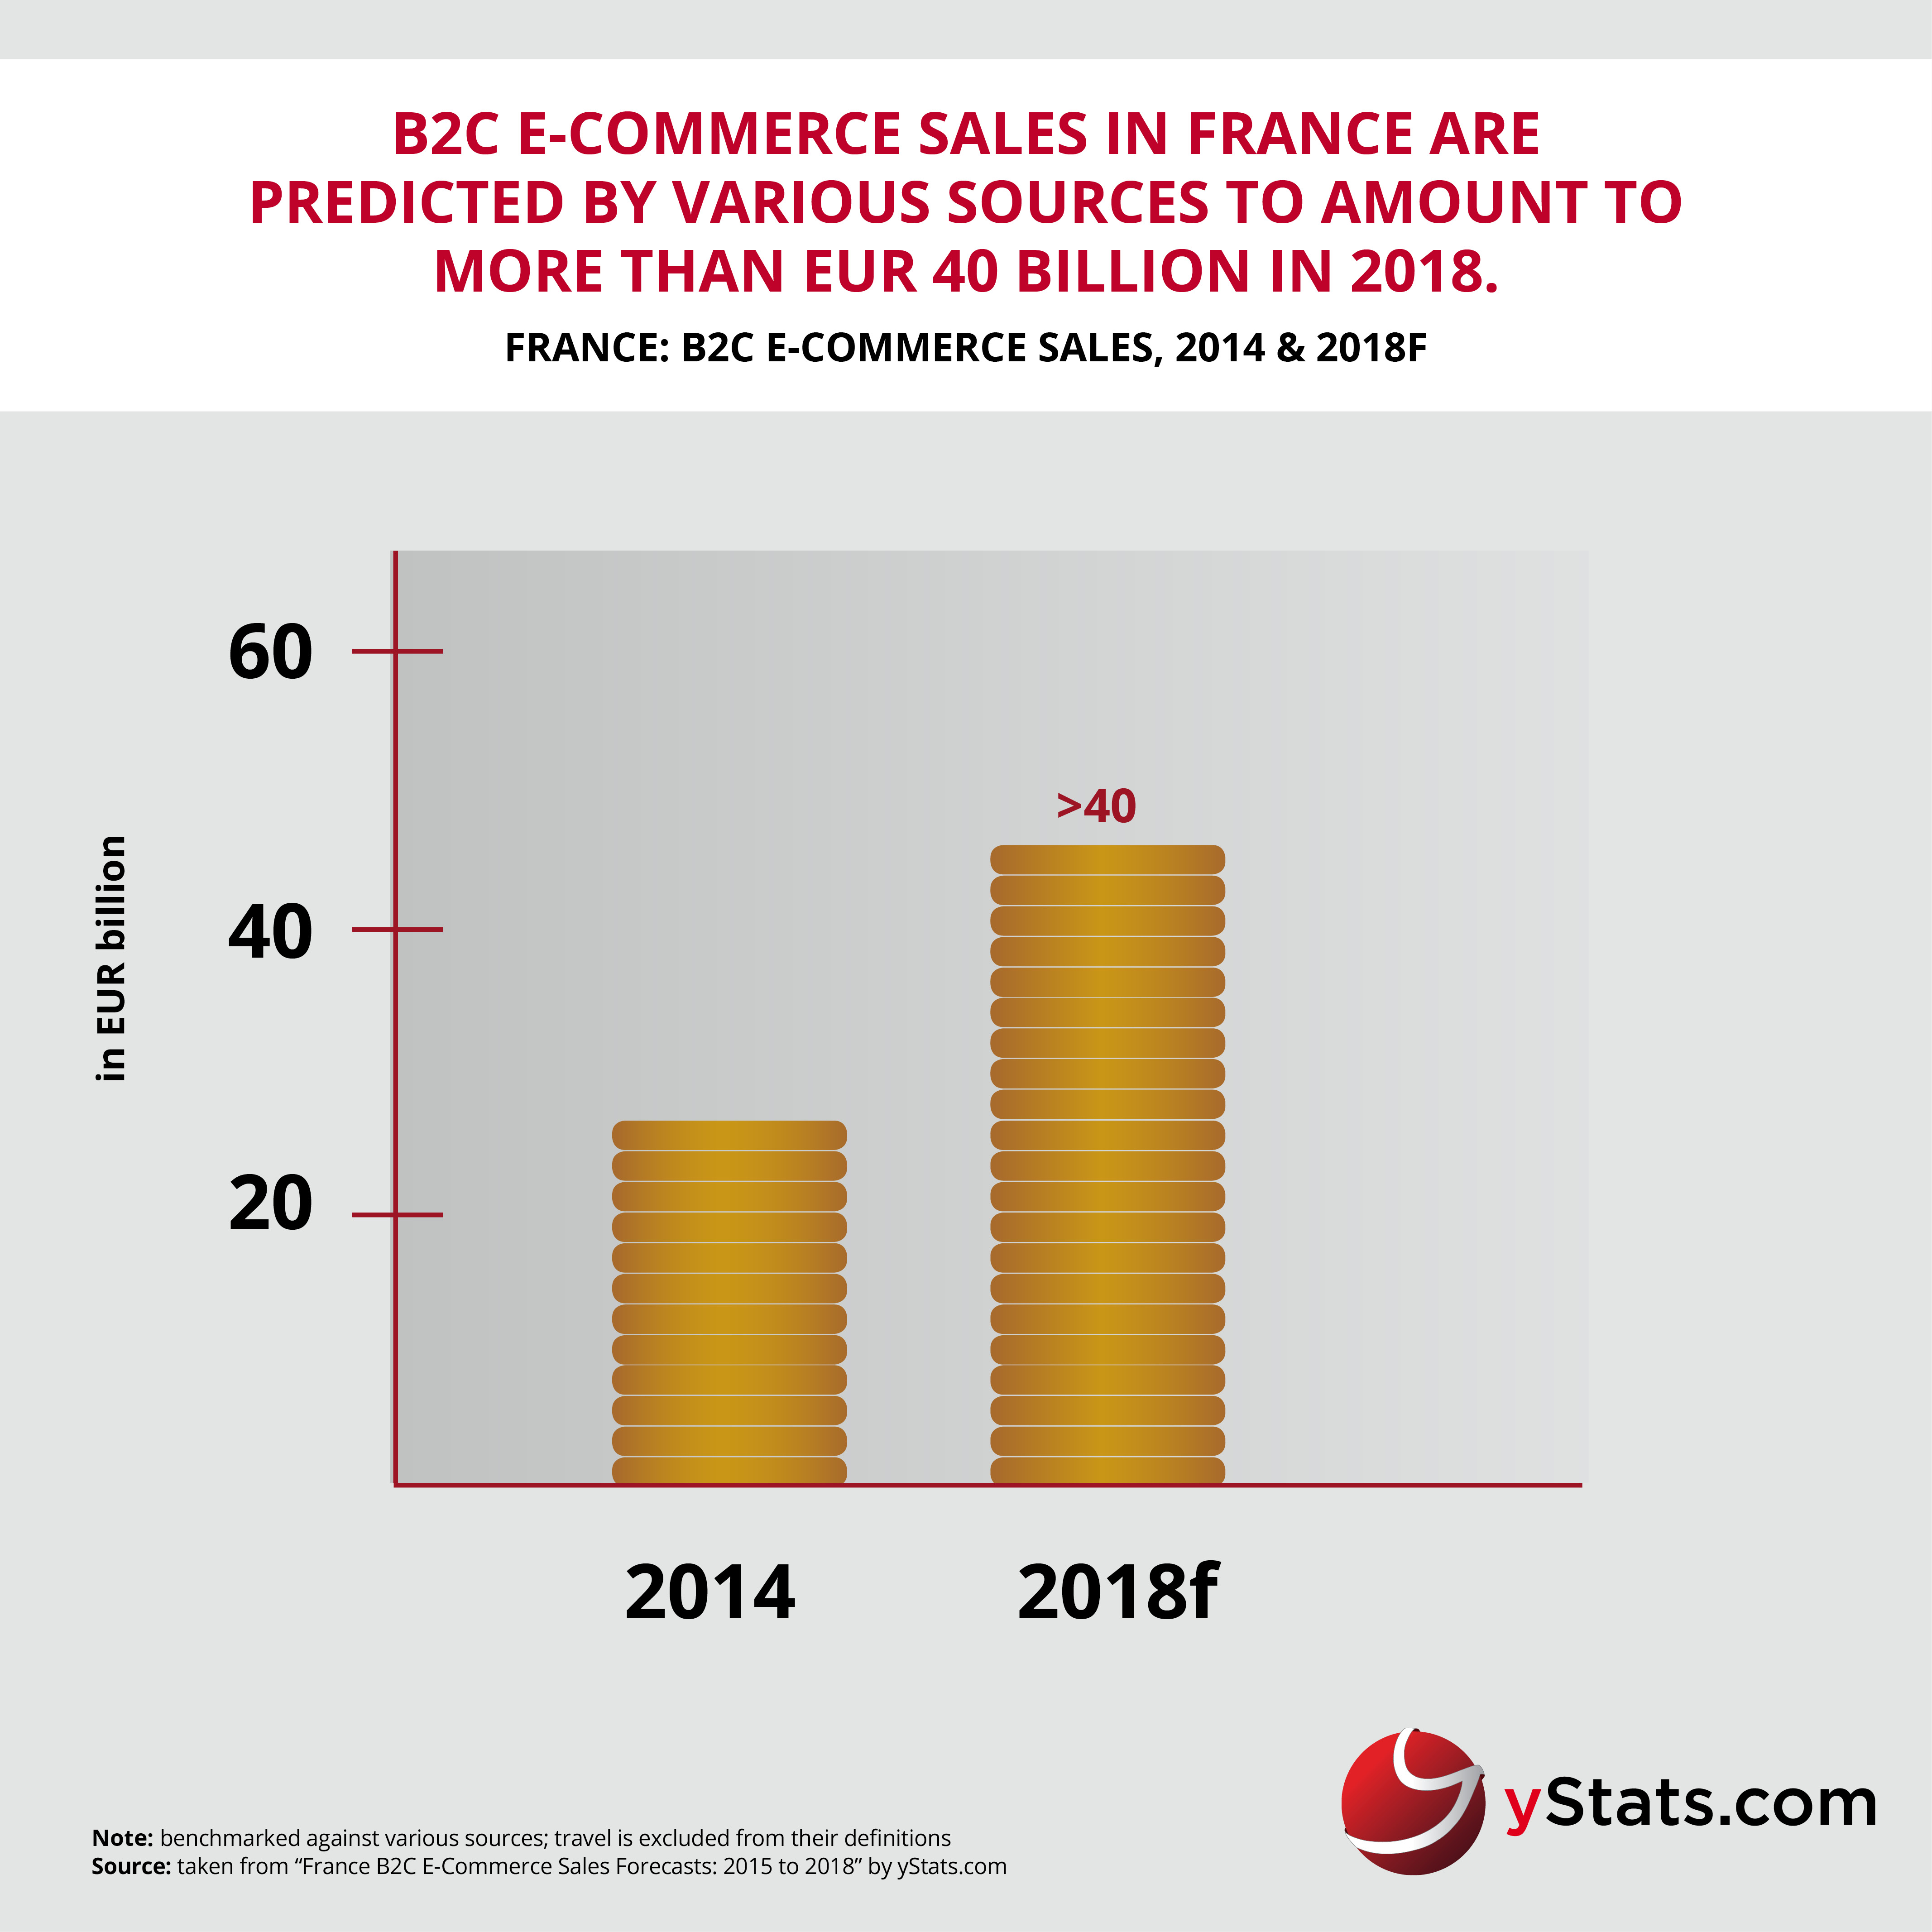 yStats.com Infographic France B2C E-Commerce Sales Forecasts 2015 to 2018